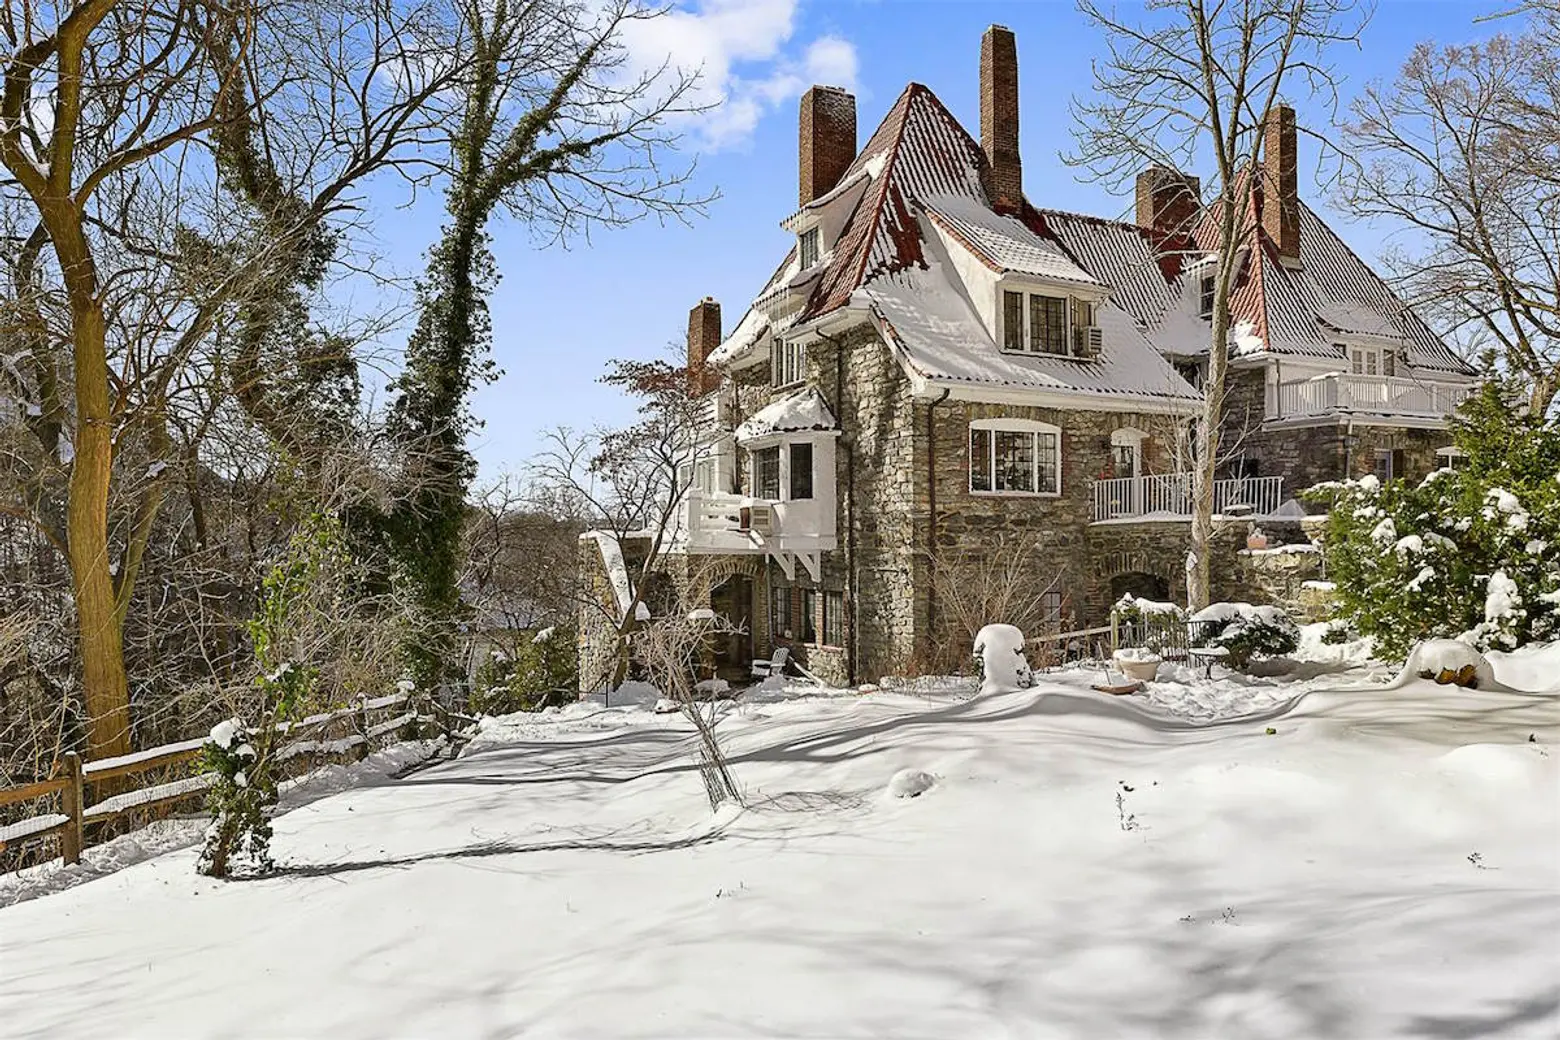 1924 cliffside Riverdale castle-cottage has magical river views, a Broadway pedigree and a $2.6M ask